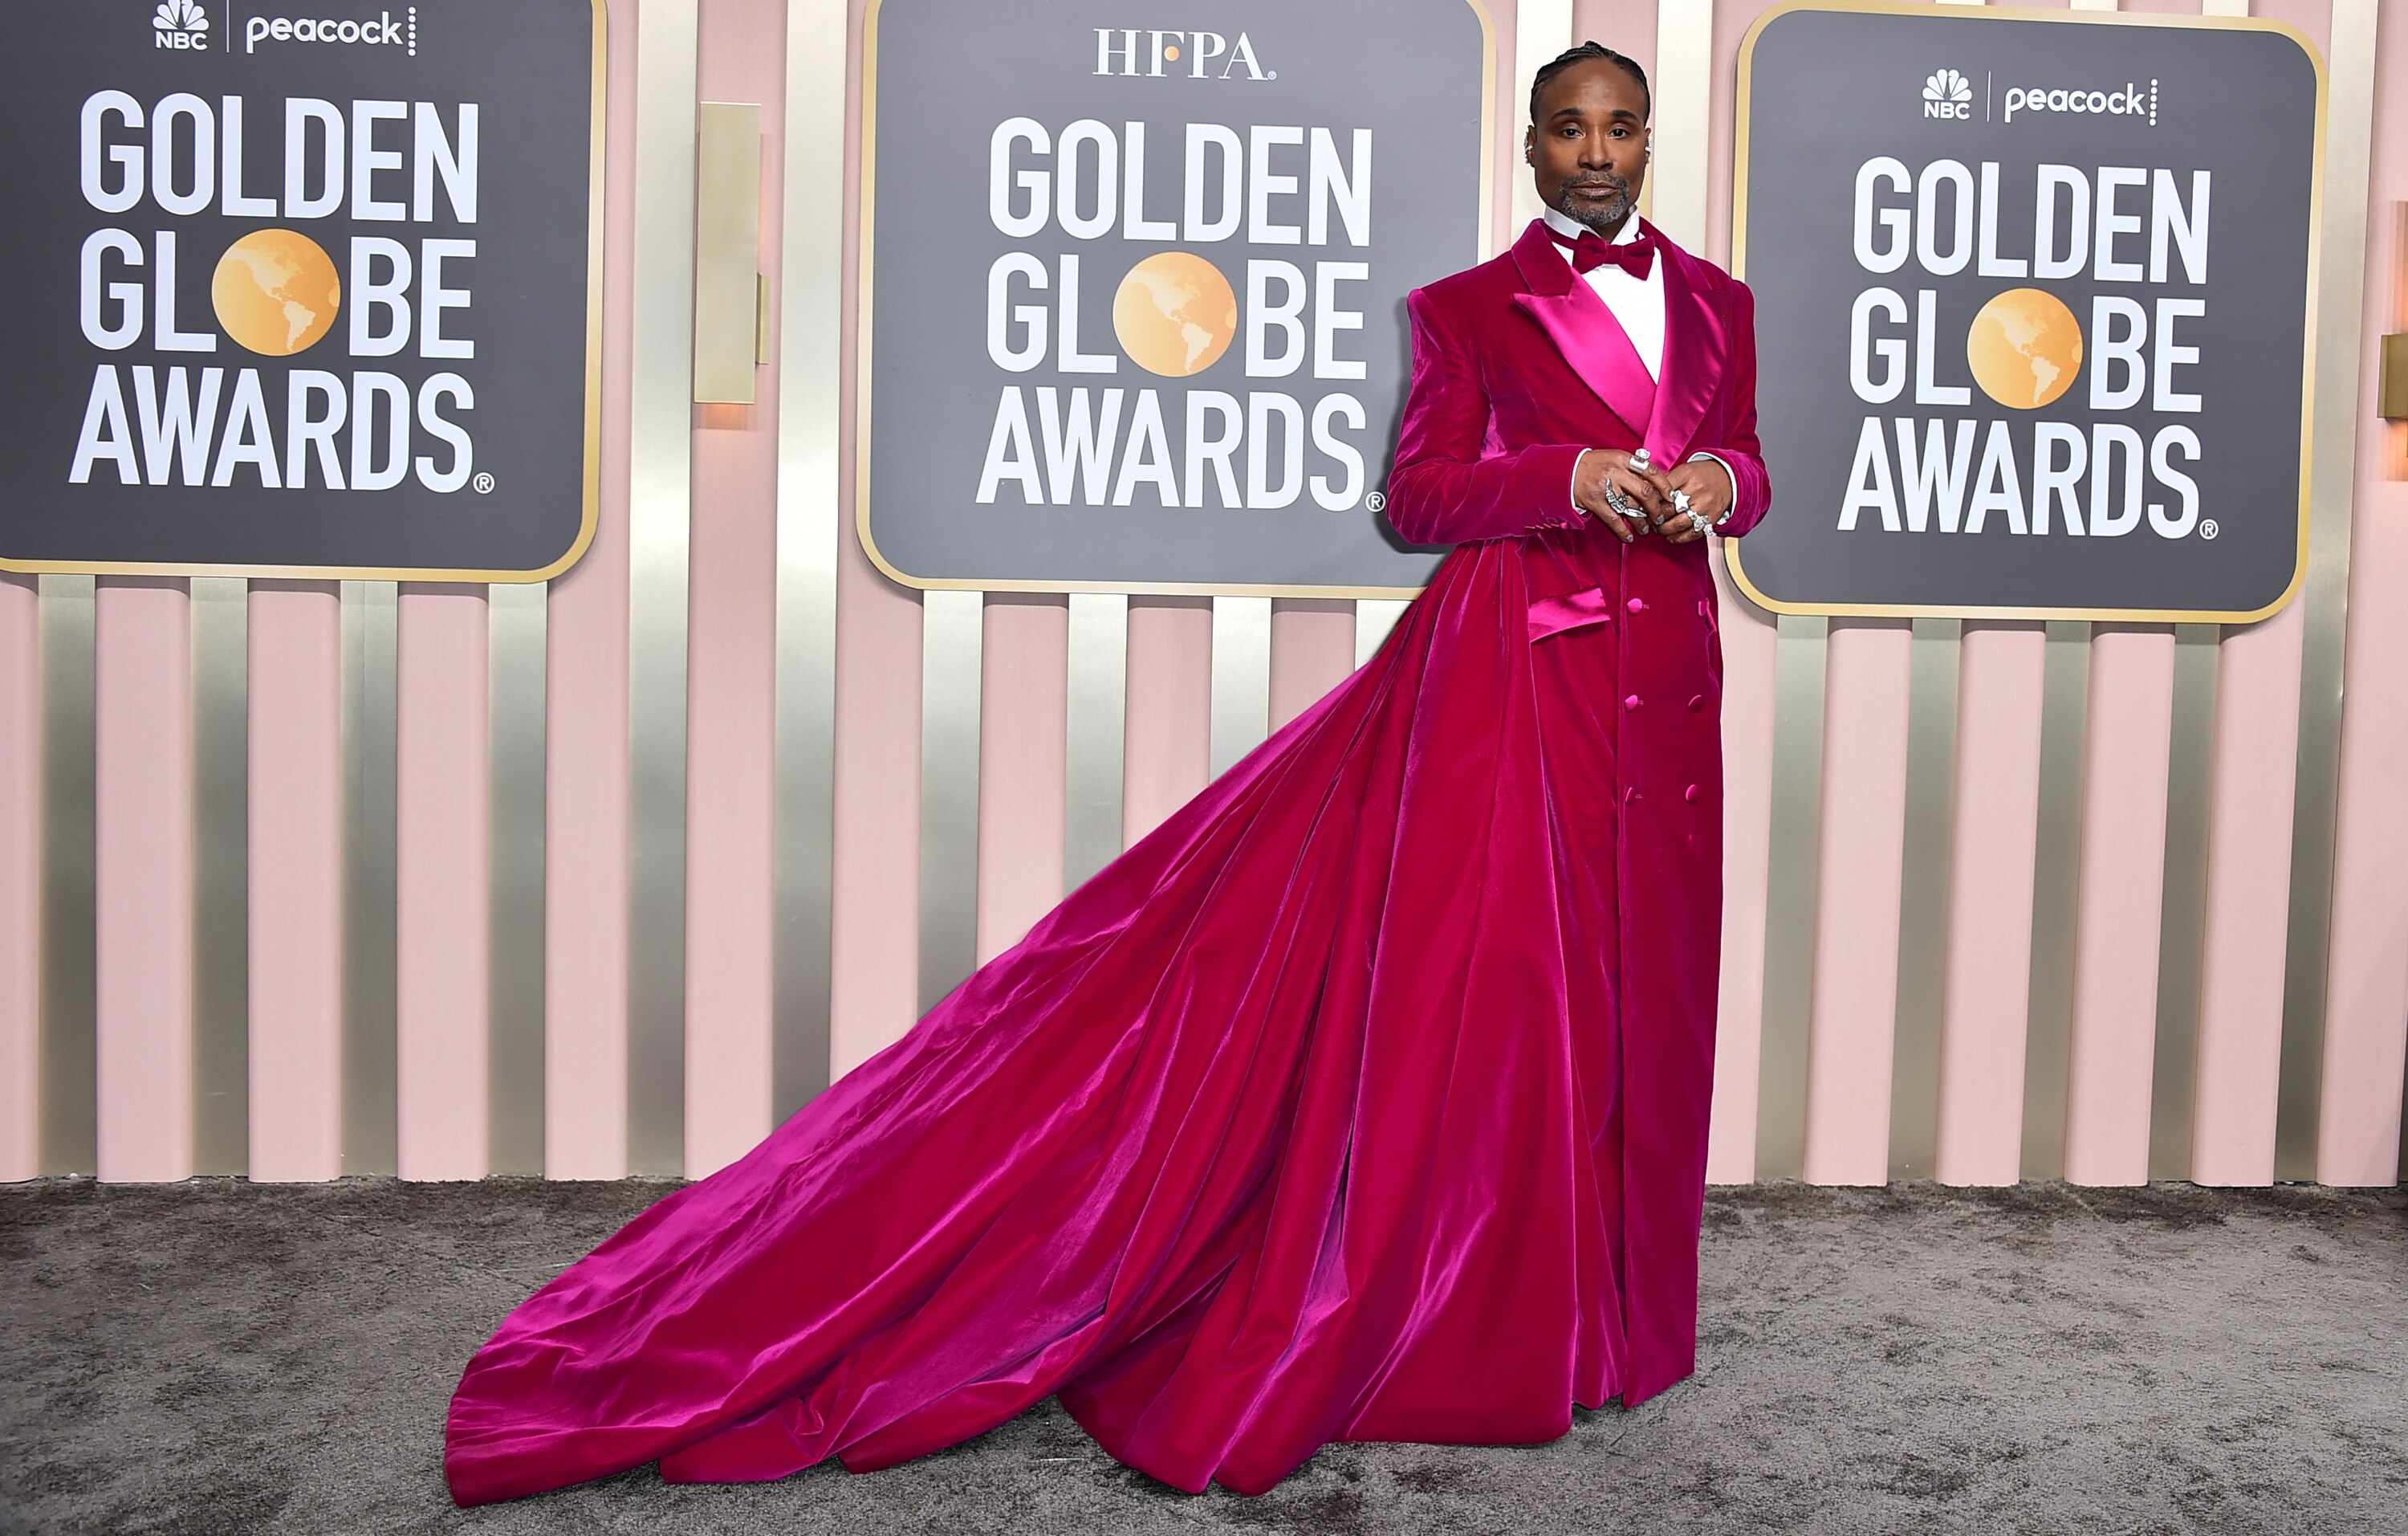 Billy Porter wearing a bright pink tuxedo gown with a long train